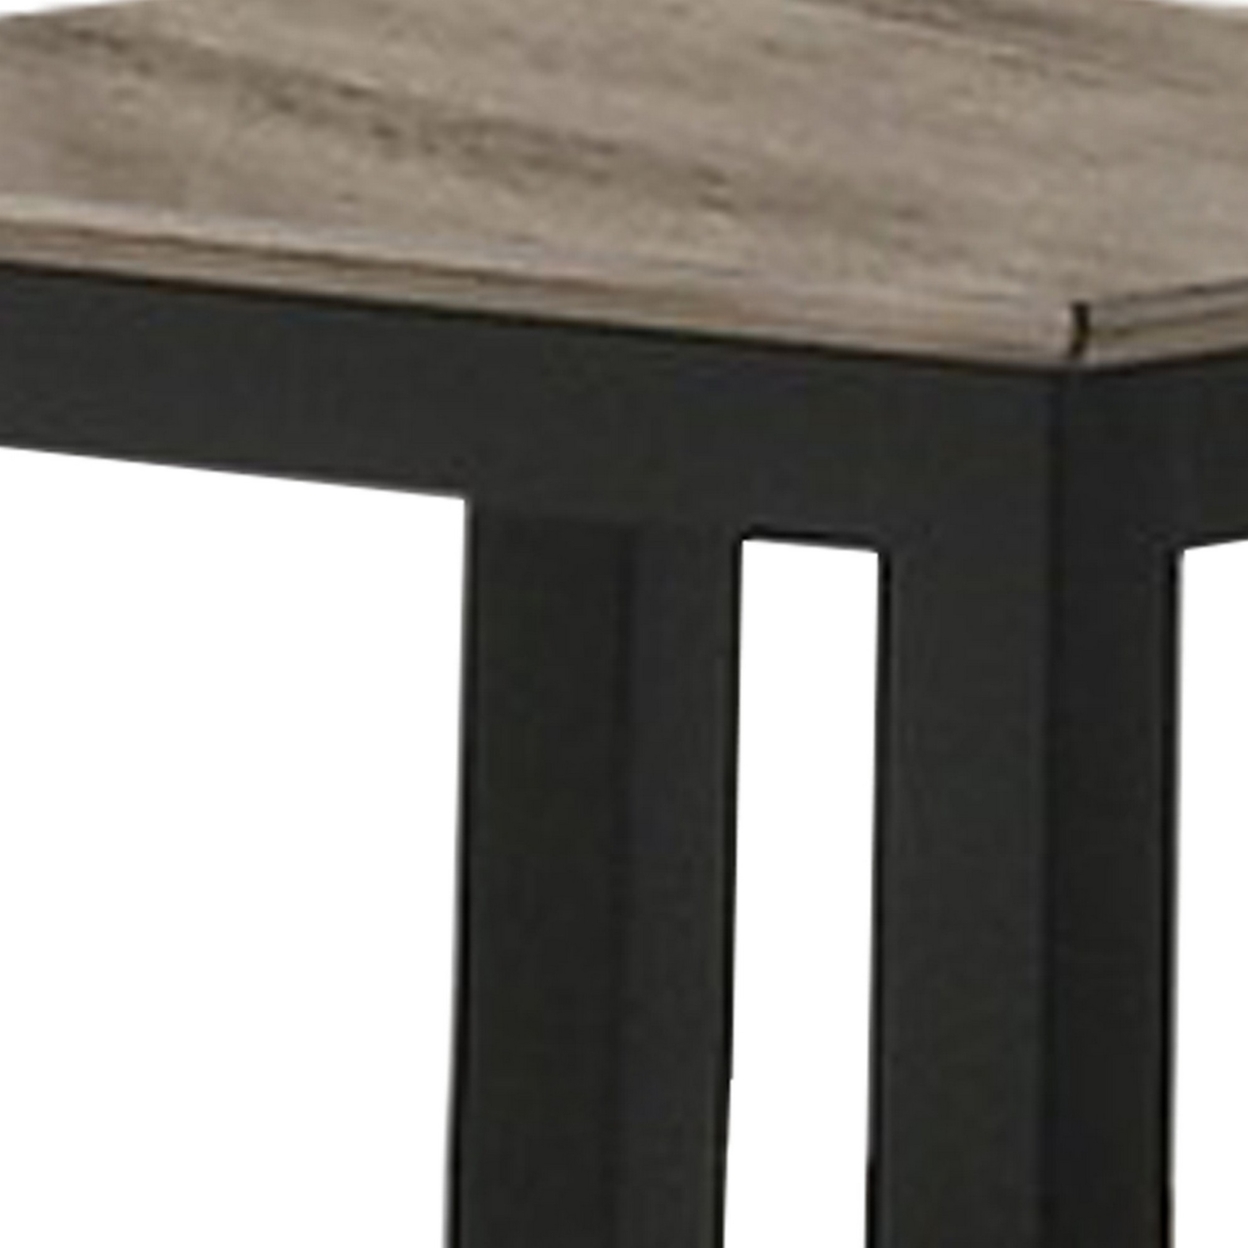 Wooden End Table With One Open Shelf, Black And Gray- Saltoro Sherpi